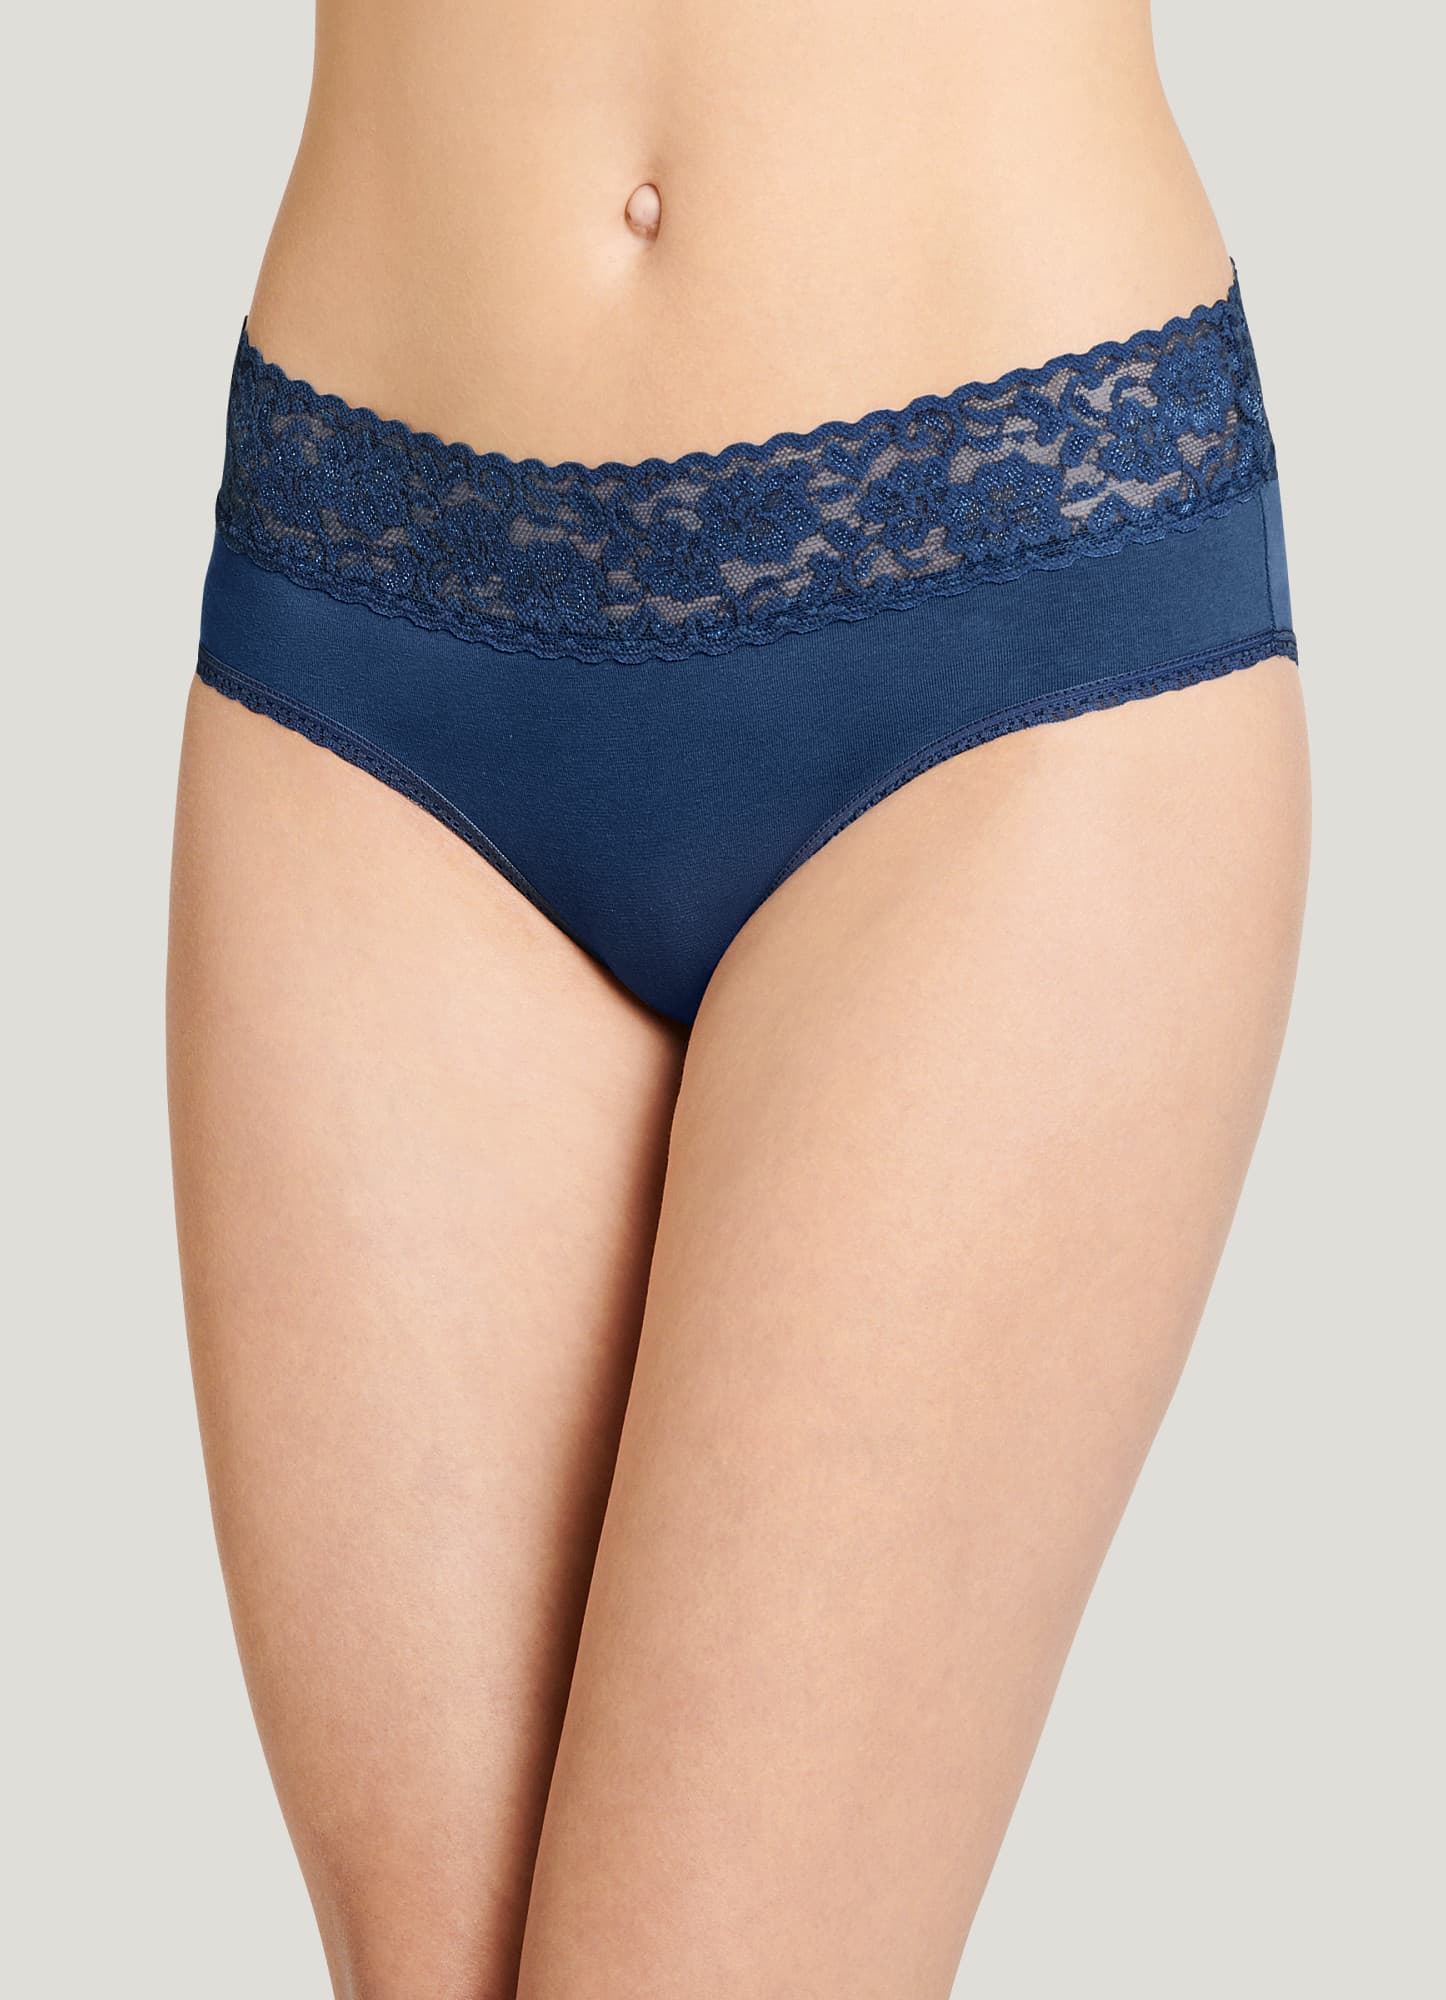 Jockey Women's Underwear Cotton Stretch Lace Hipster, Dusty Sand, XS at   Women's Clothing store